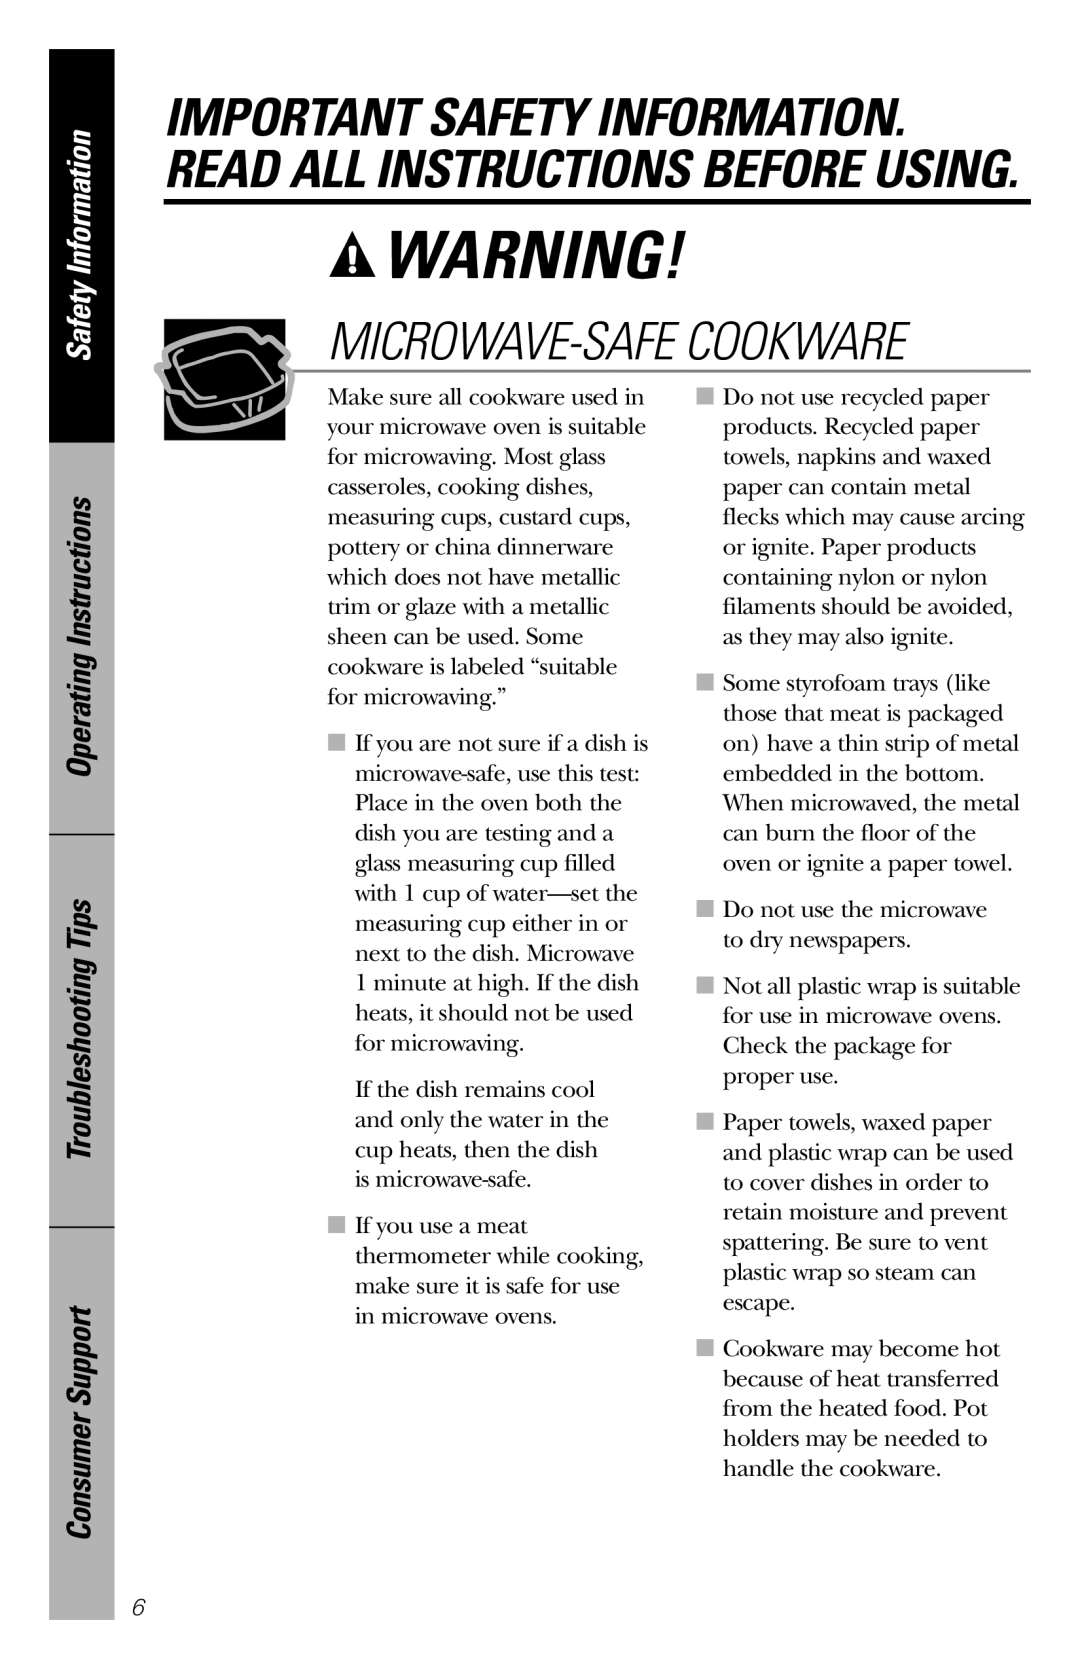 GE JES1136 Microwave-Safe Cookware, Operating Instructions Troubleshooting Tips Consumer Support, Safety Information 